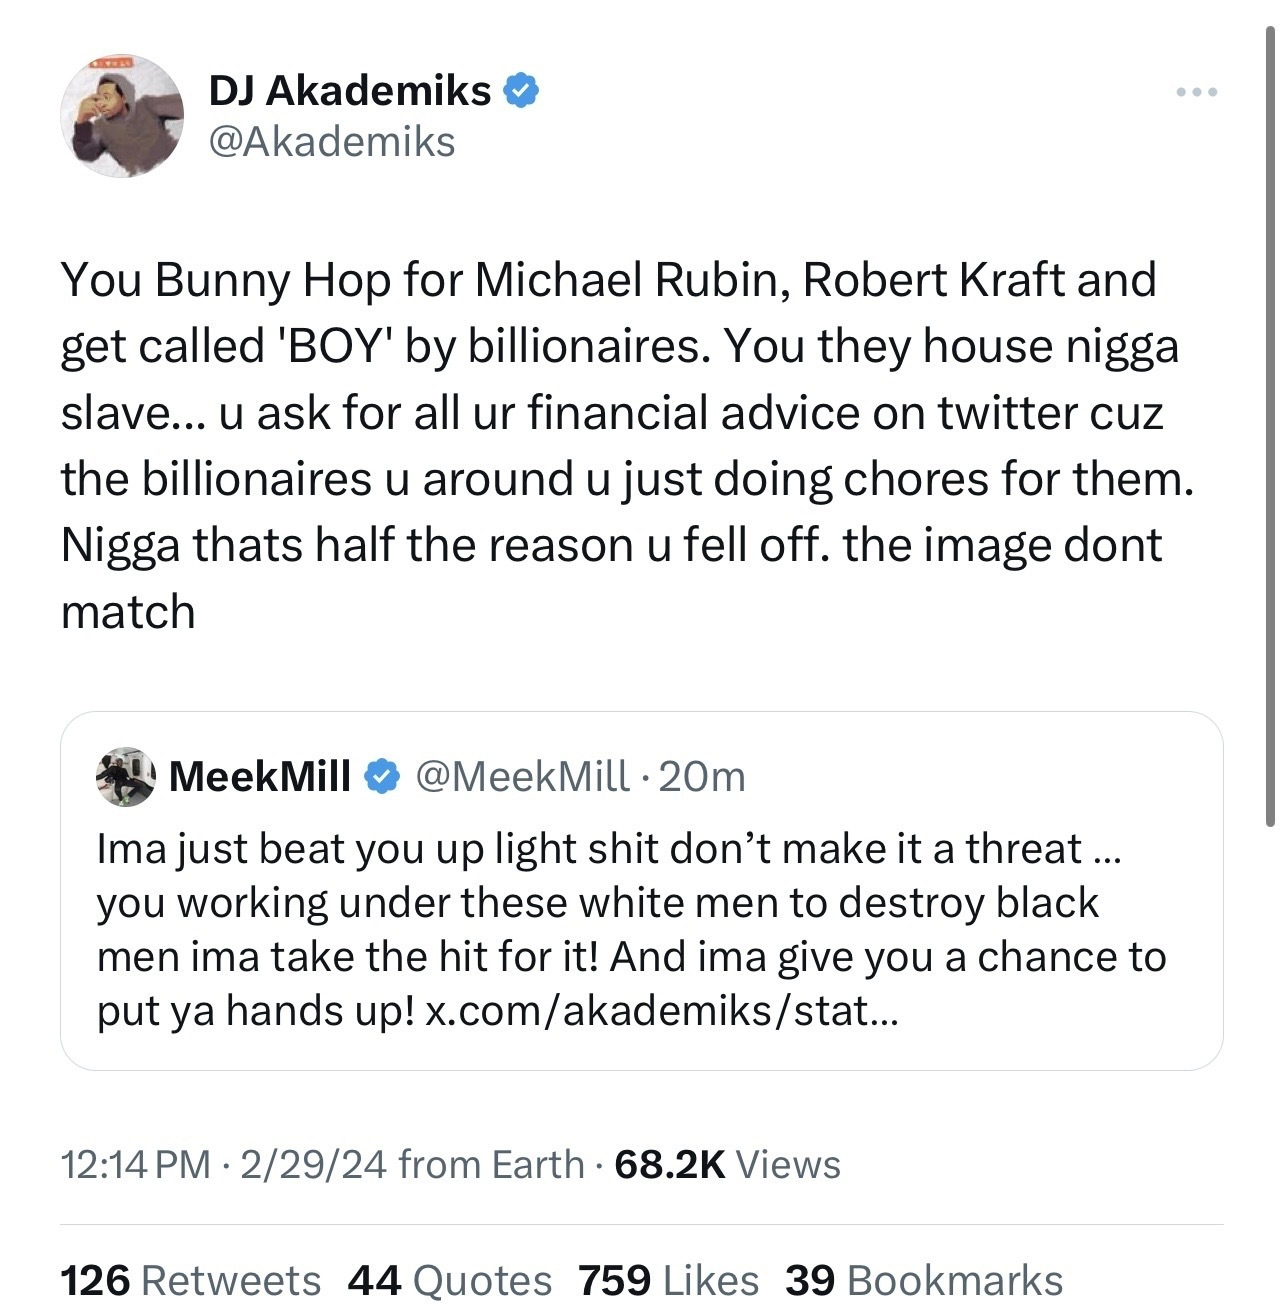 Tweet from DJ Akademiks criticizing a celebrity for being submissive to billionaires and another tweet from Meek Mill responding with a threat